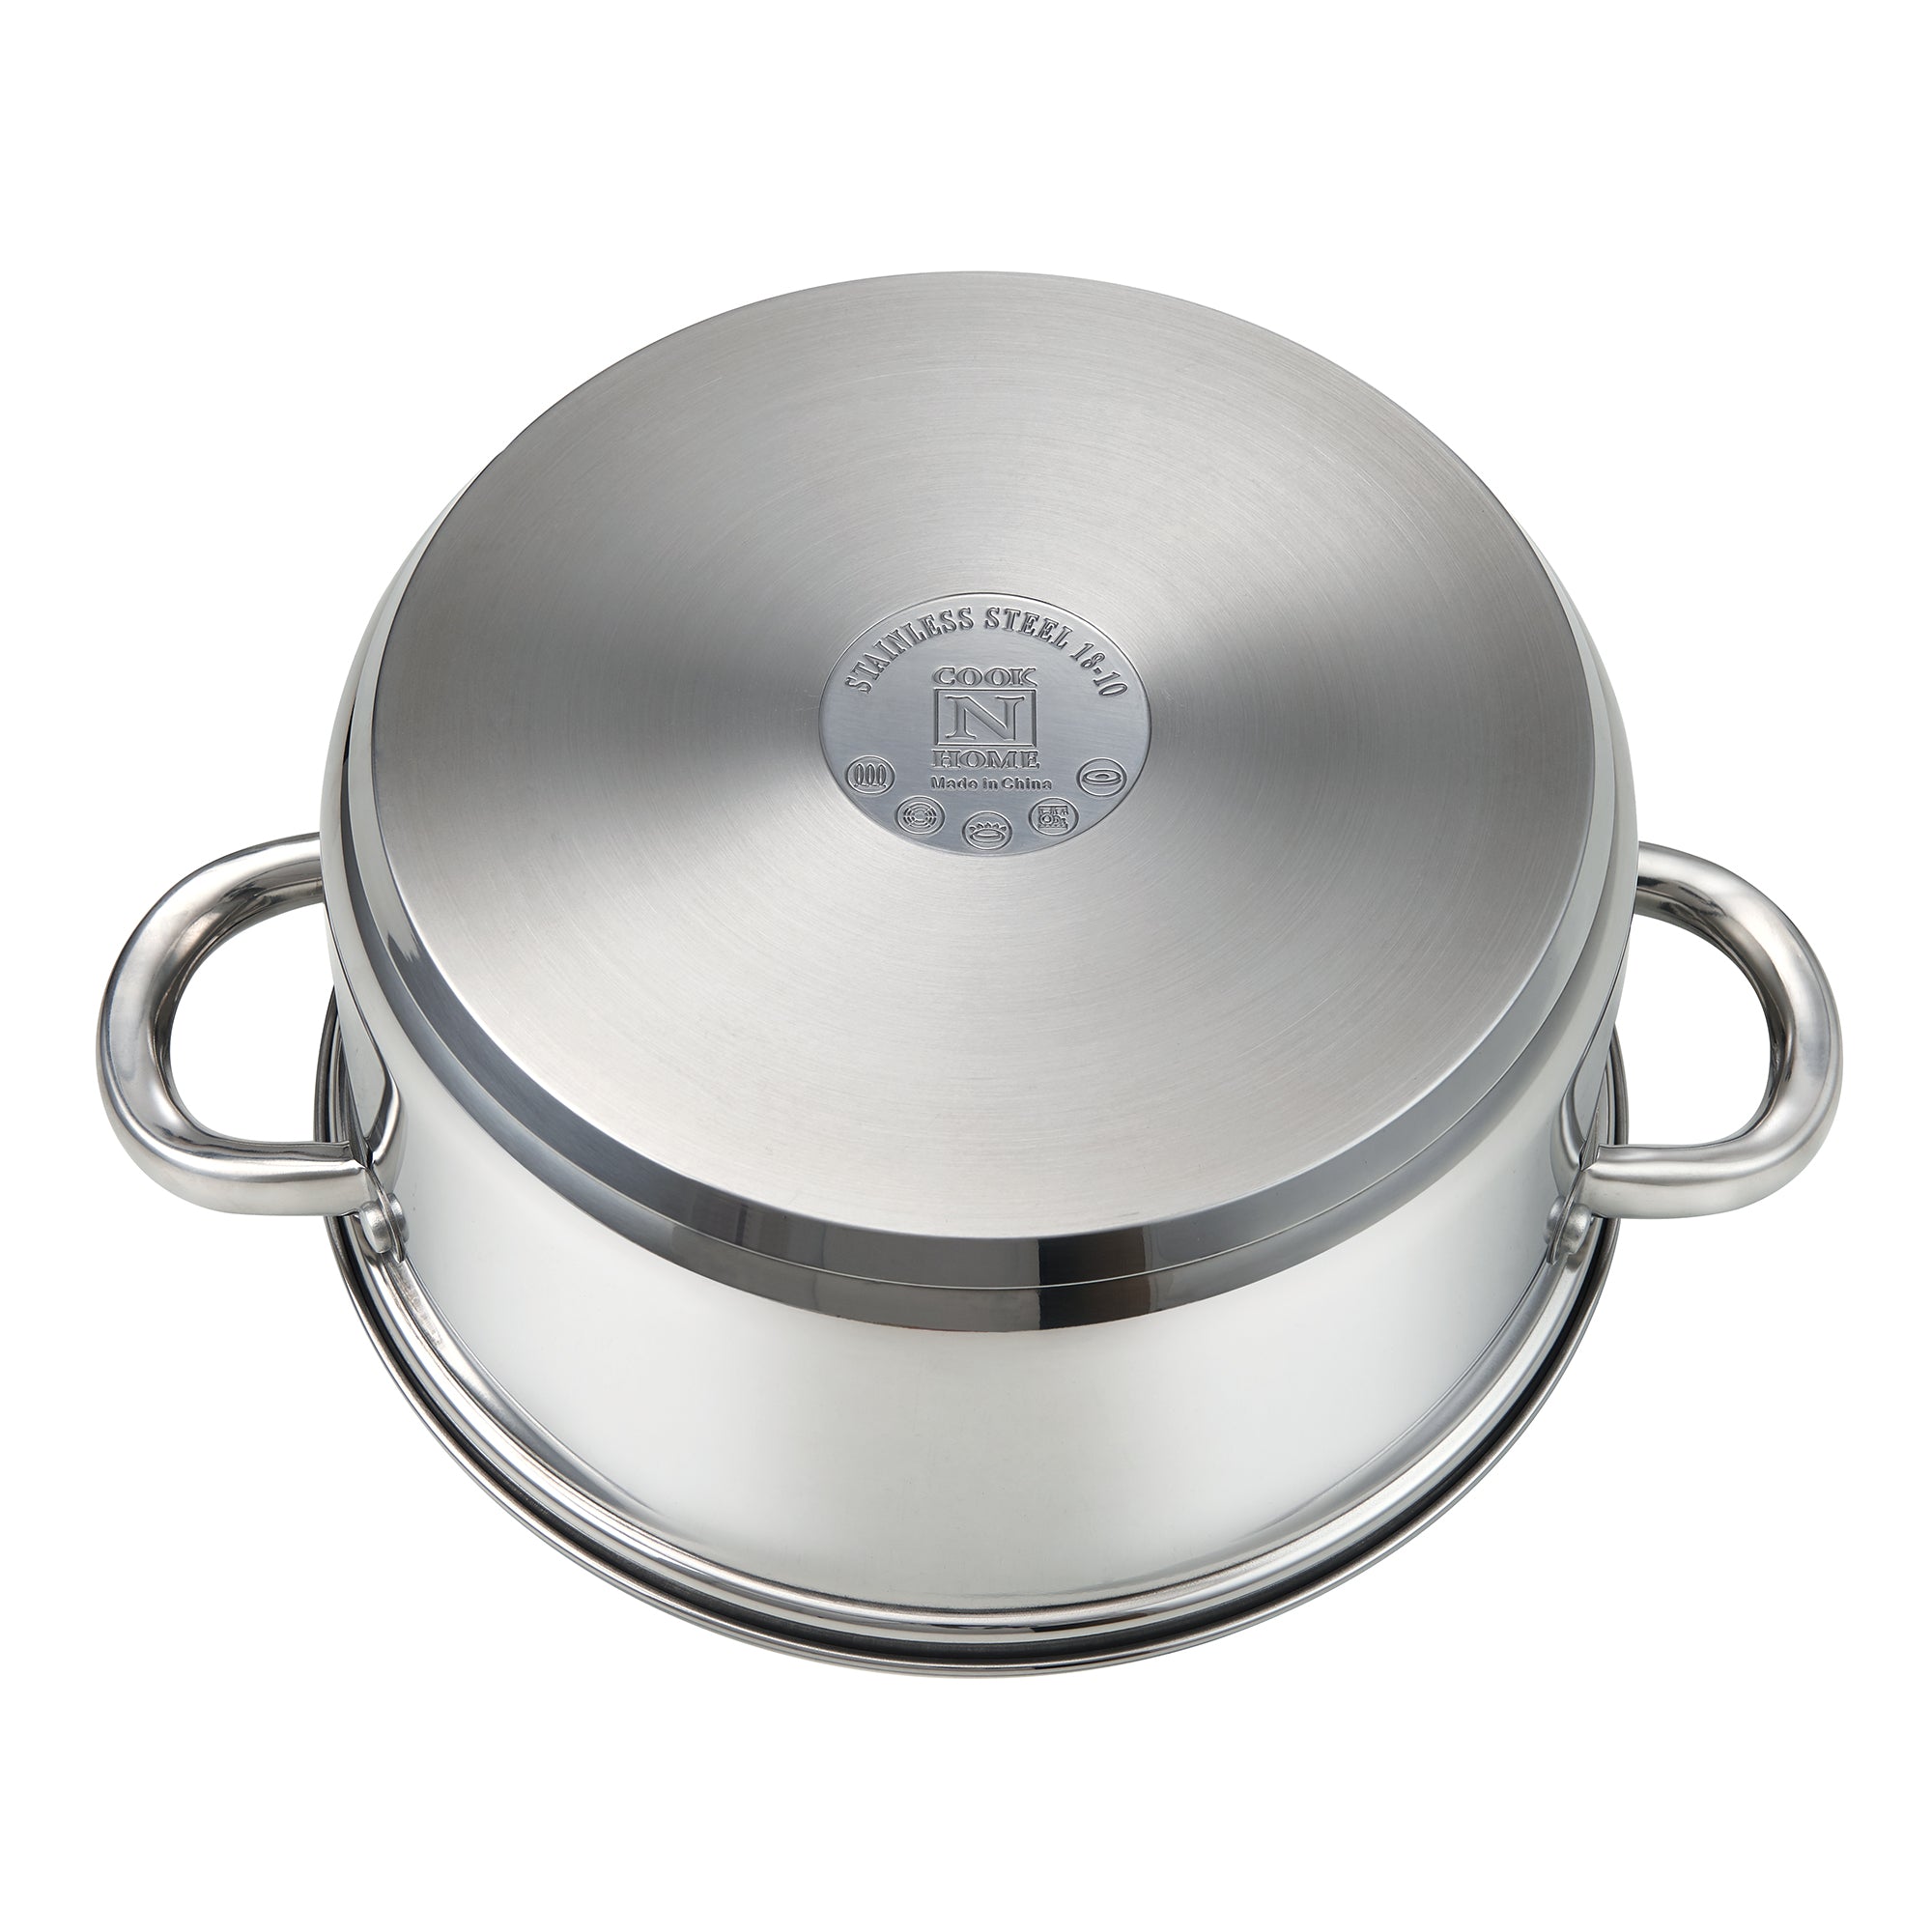 Cook N Home Sauce Pot Stainless Steel Stockpot with Glass Lid